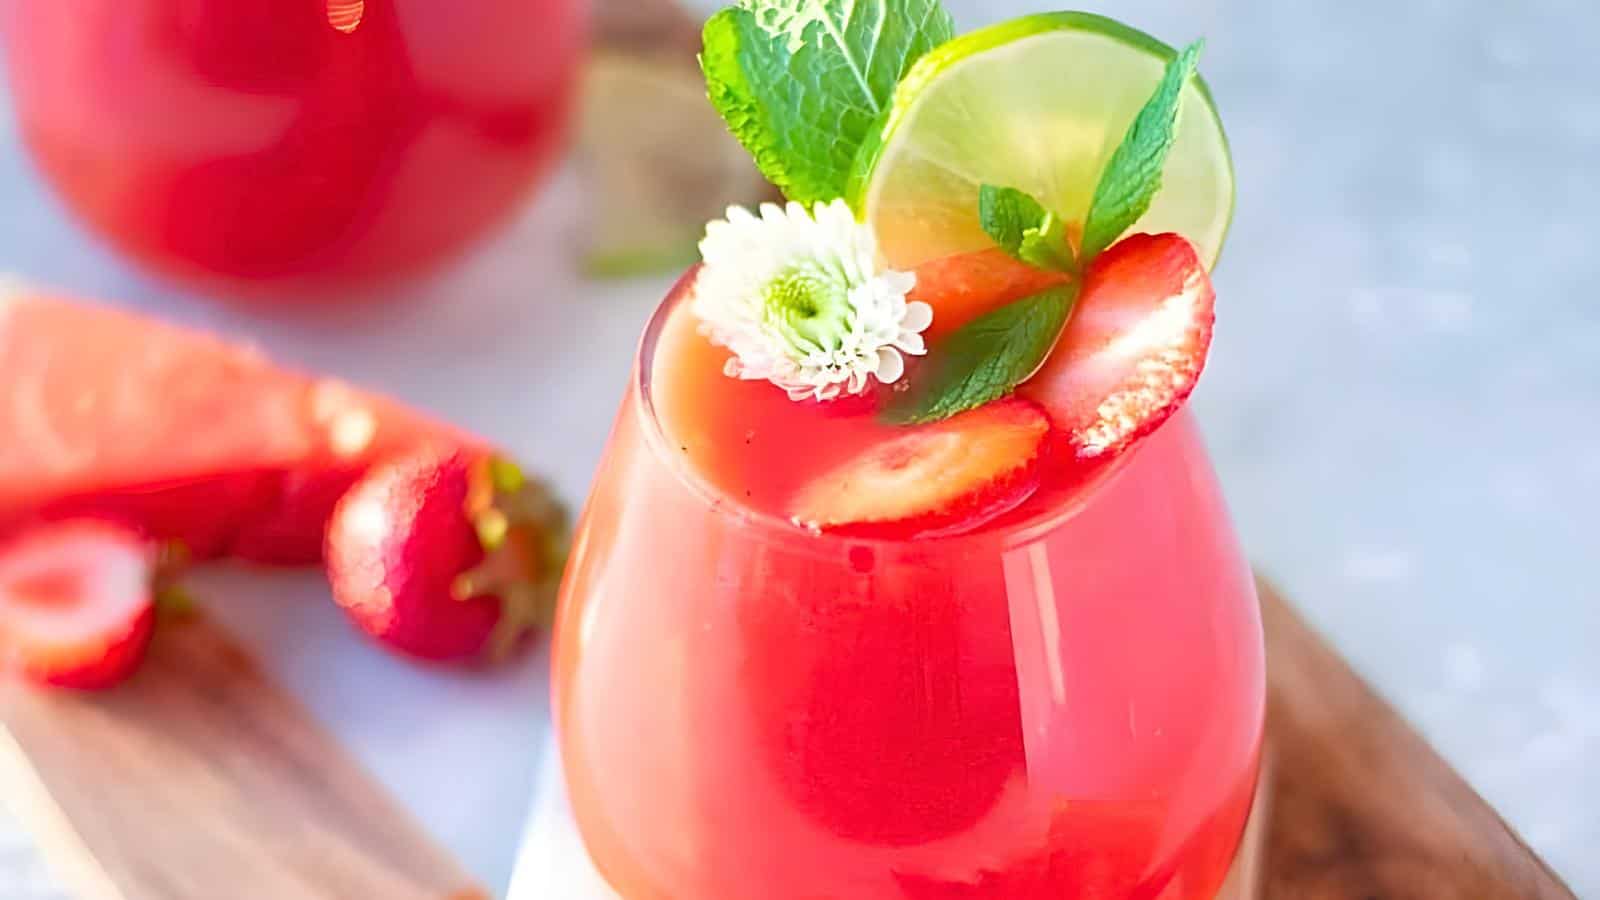 <p>Beat the summer heat with this Strawberry Watermelon Rosé Sangria! Packed with fresh fruit and a splash of rosé, it’s the perfect cocktail for a sunny day. Serve chilled and enjoy the vibrant flavors.<br><strong>Get the Recipe: </strong><a href="https://alatinflair.com/strawberry-watermelon-rose-sangria/?utm_source=msn&utm_medium=page&utm_campaign=msn" rel="noopener">Refreshing Strawberry Watermelon Rosé Sangria</a></p>